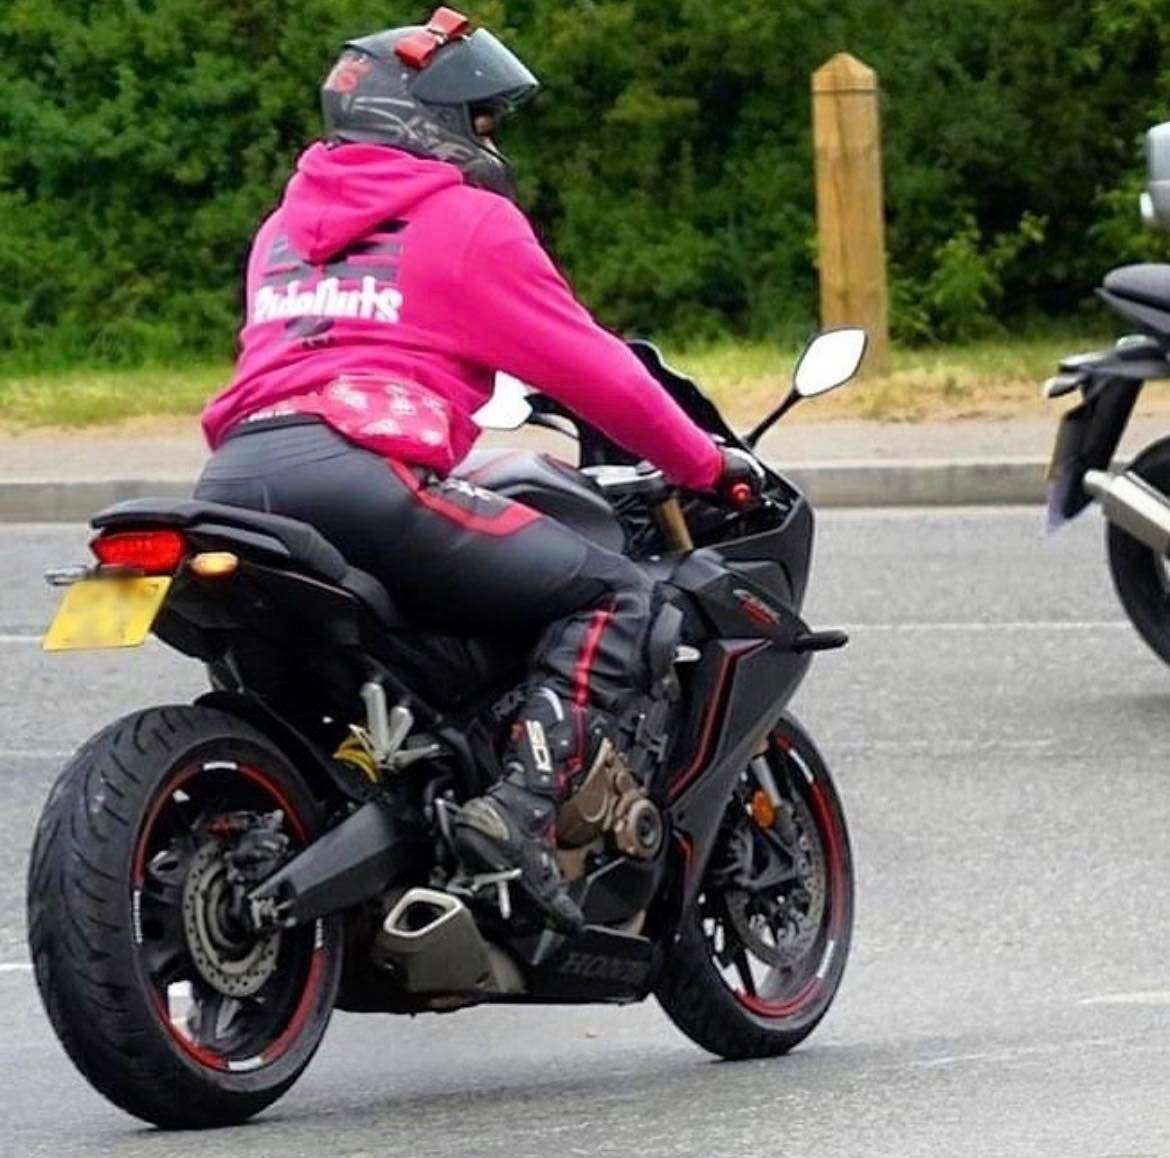 Zara Parr was knocked from her Honda motorcycle at the Stockbury Roundabout